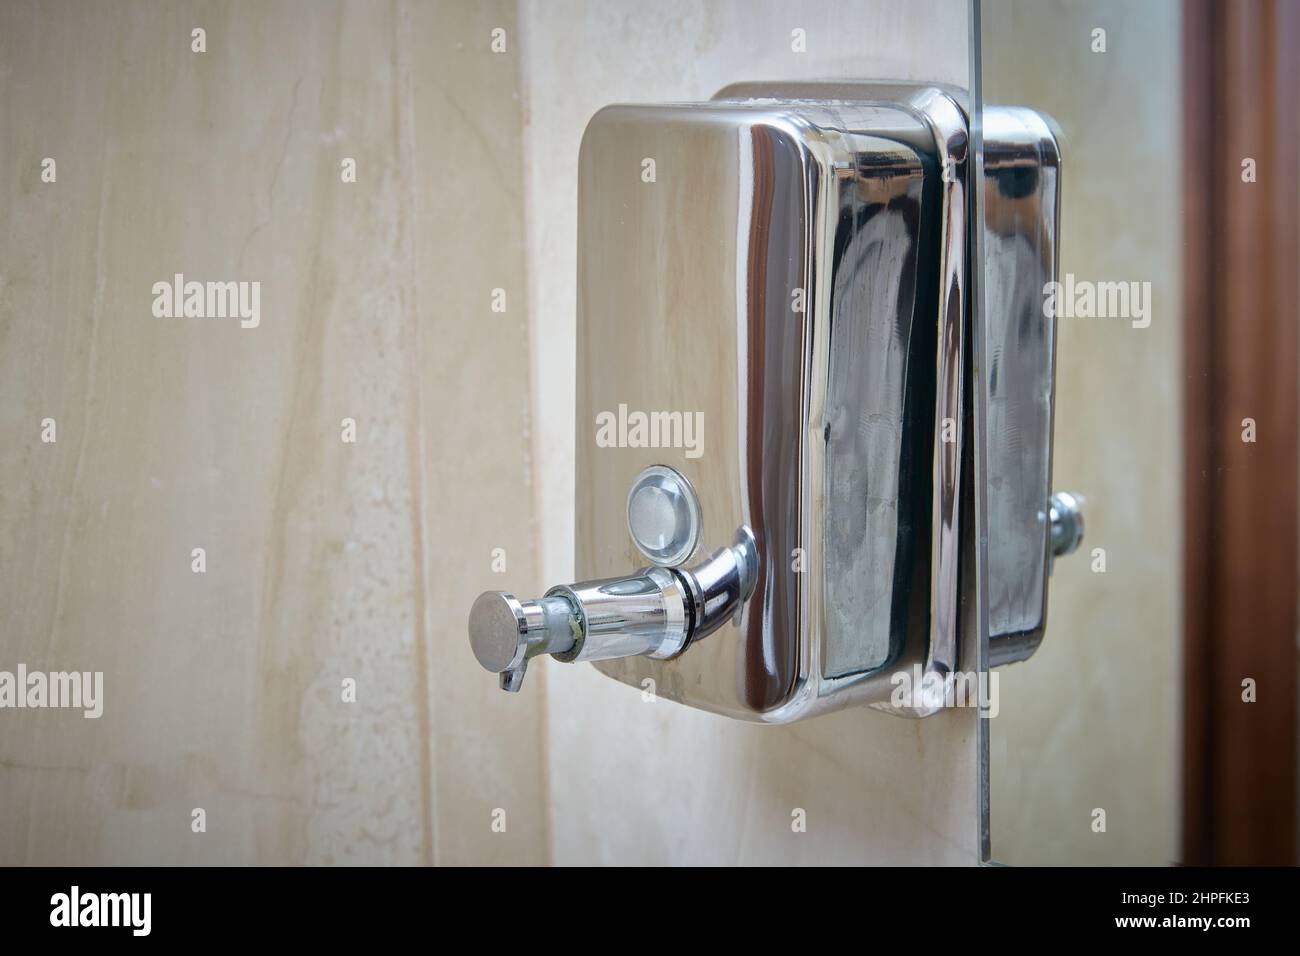 towel Metal dispenser for soap or disinfectant. Stock Photo